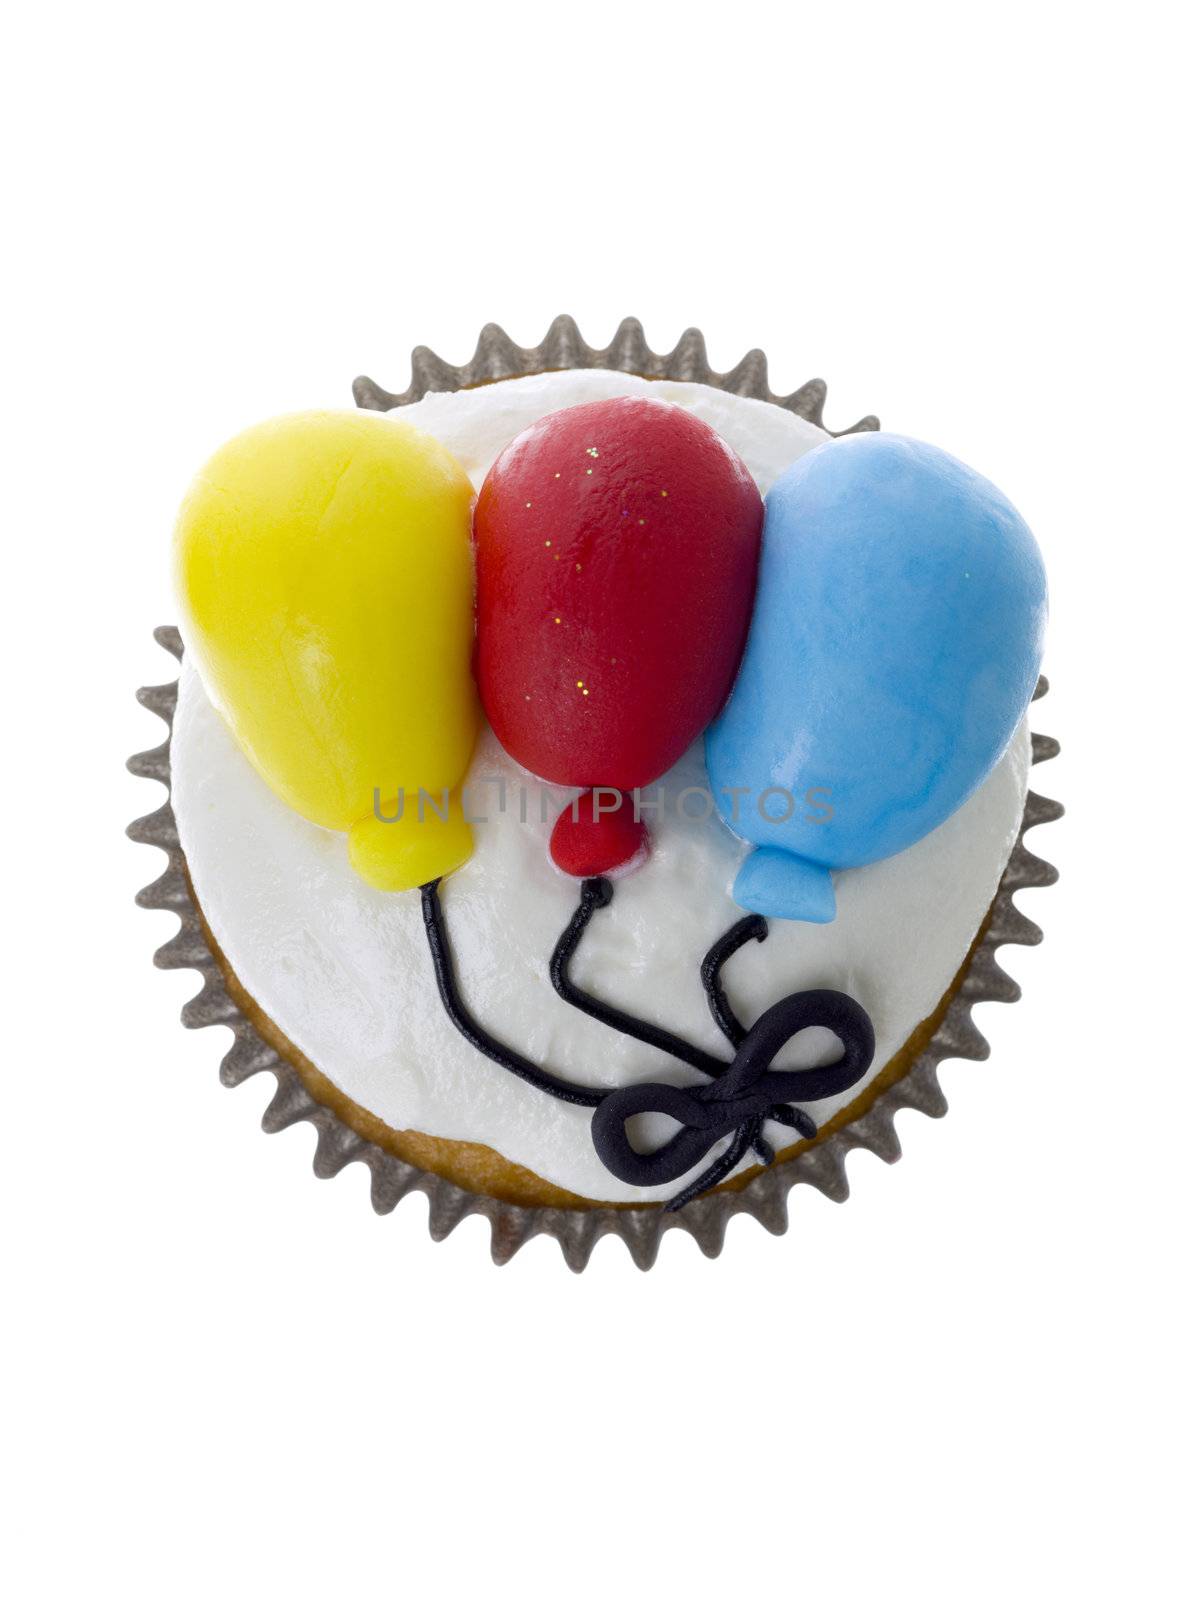 Cupcake with fondant balloon toppings